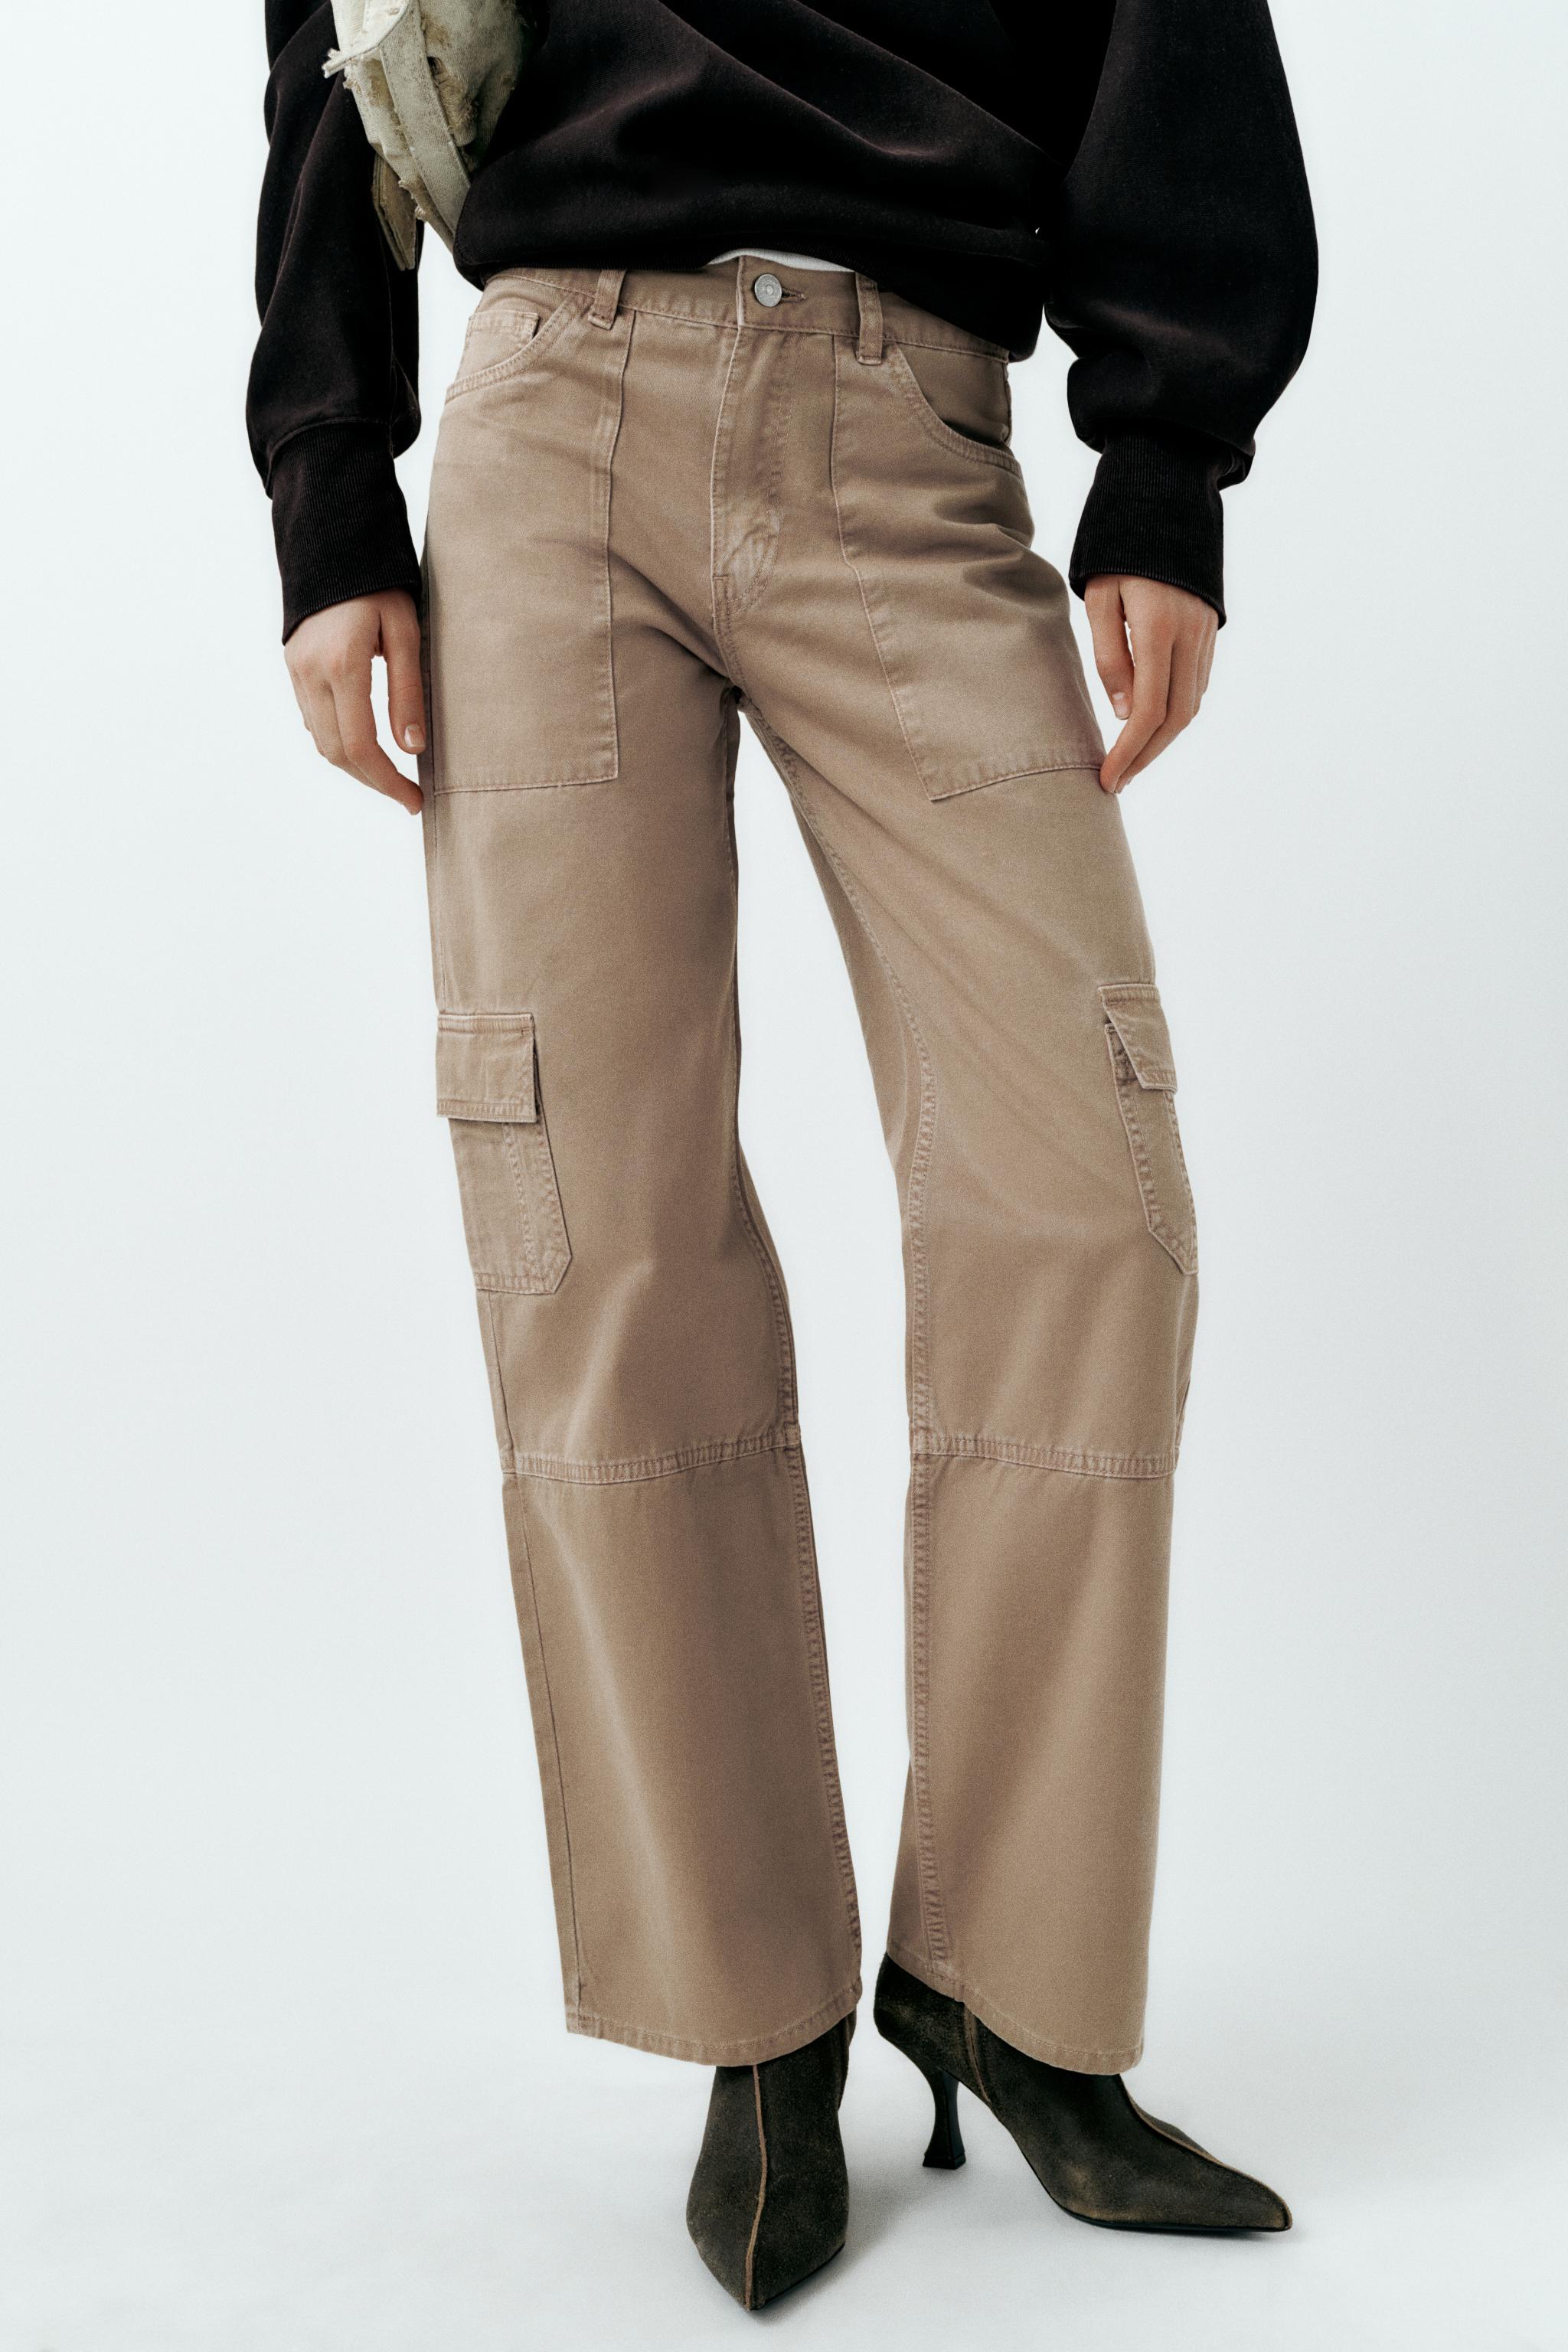 Women's Cargo Trousers, Explore our New Arrivals